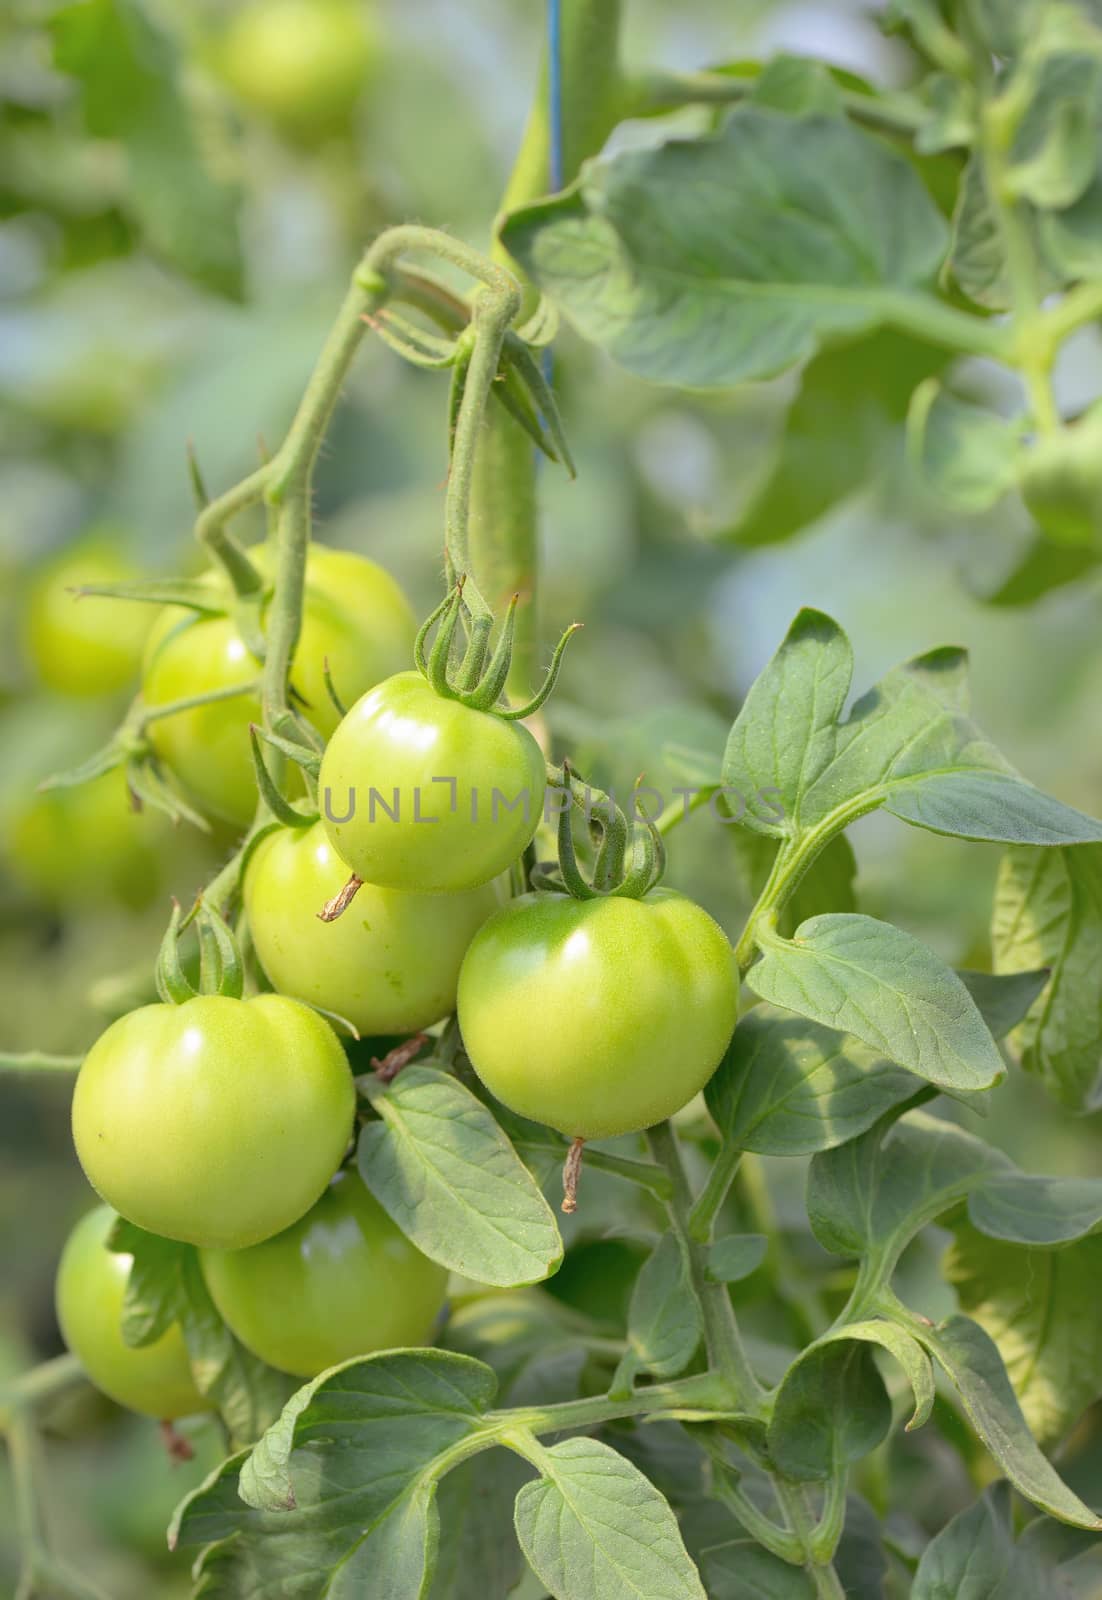 Unripe tomatoes in a greenhouse by mady70